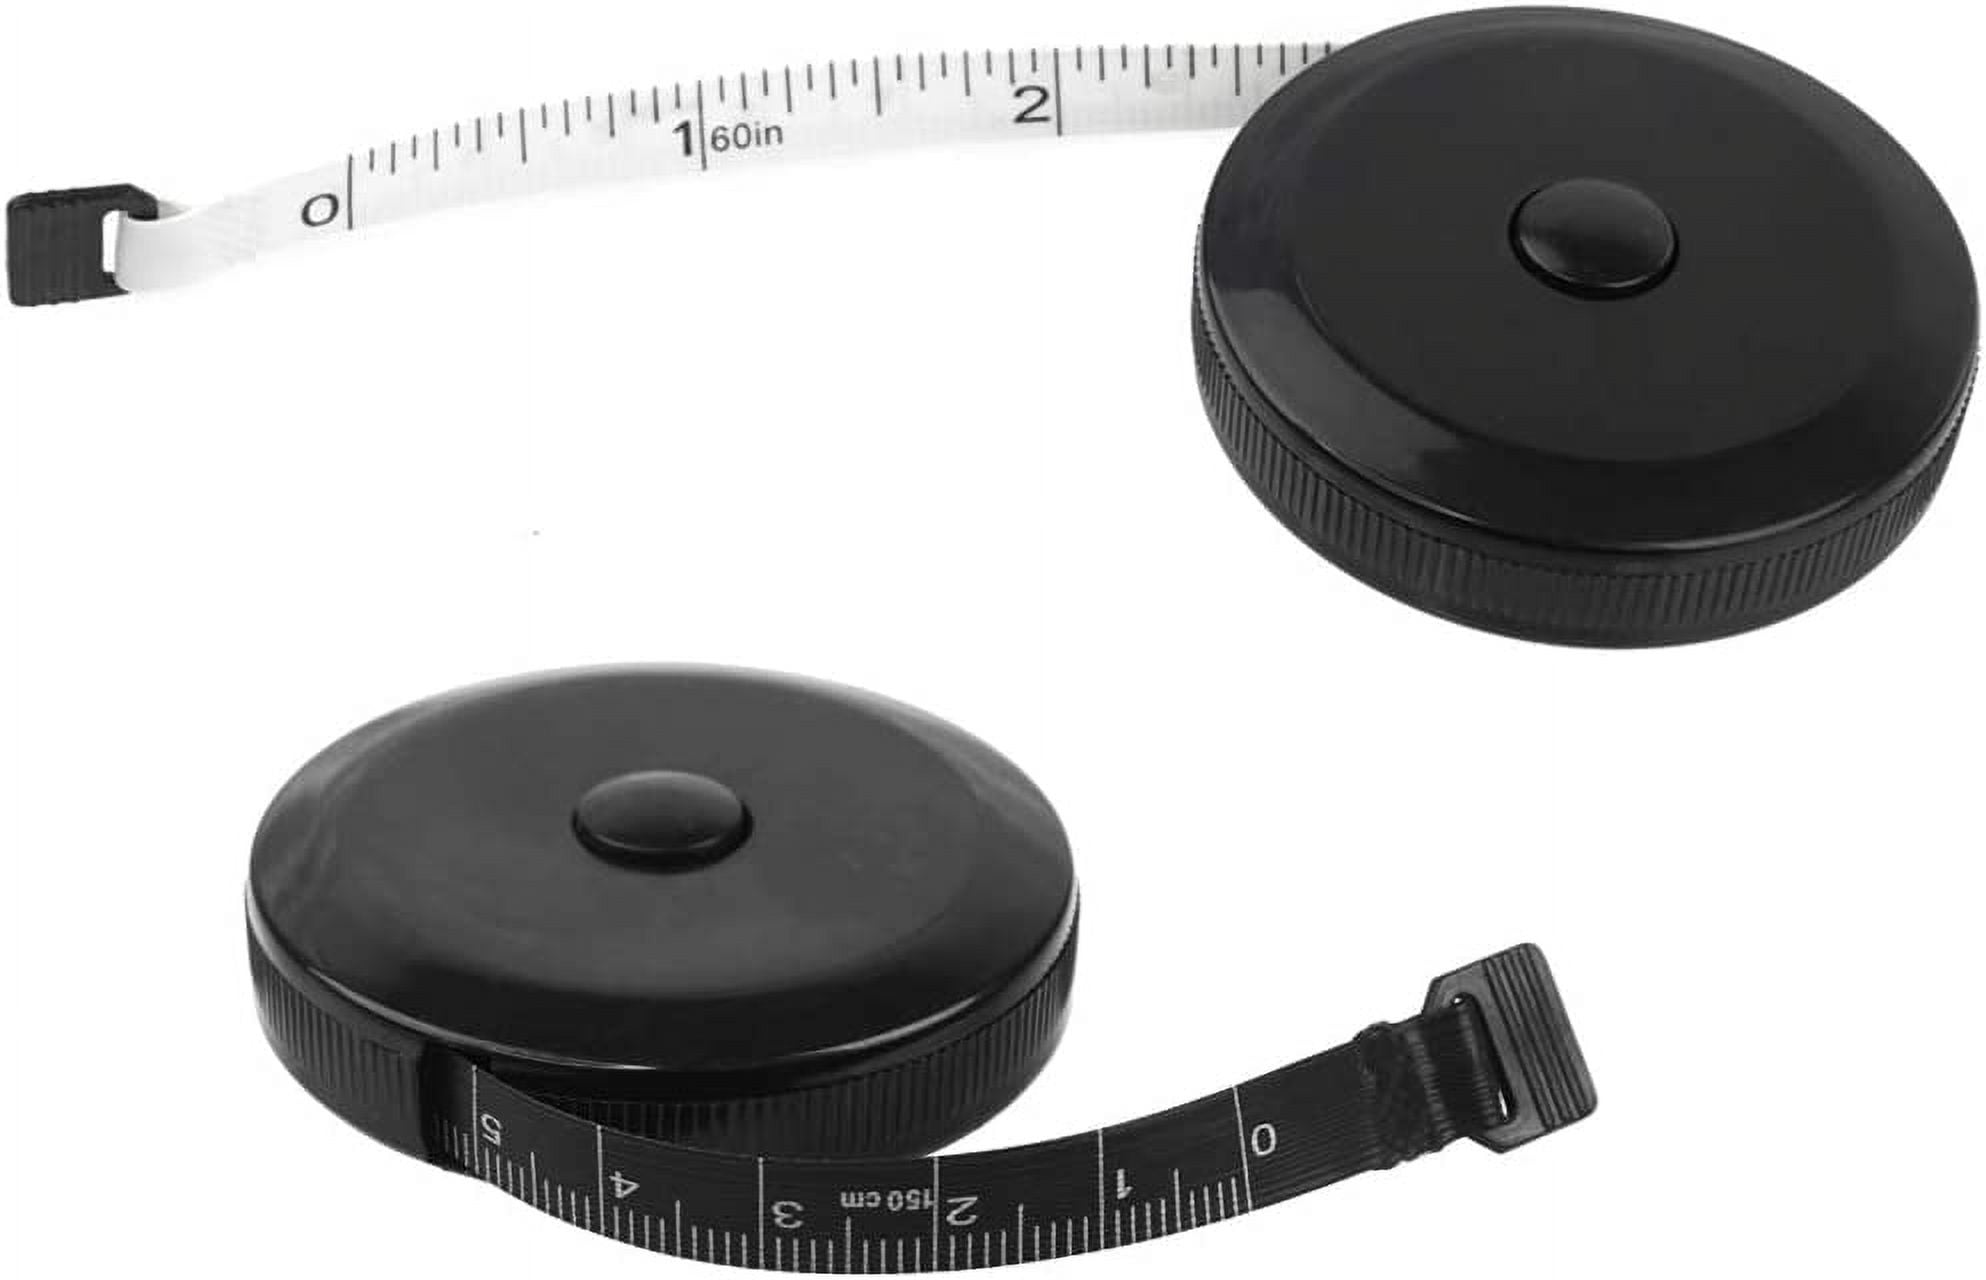 1pc 1.5/3m Retractable Soft Cloth Measuring Tape For Measuring Body  Circumference, Waist, Clothing, Etc.